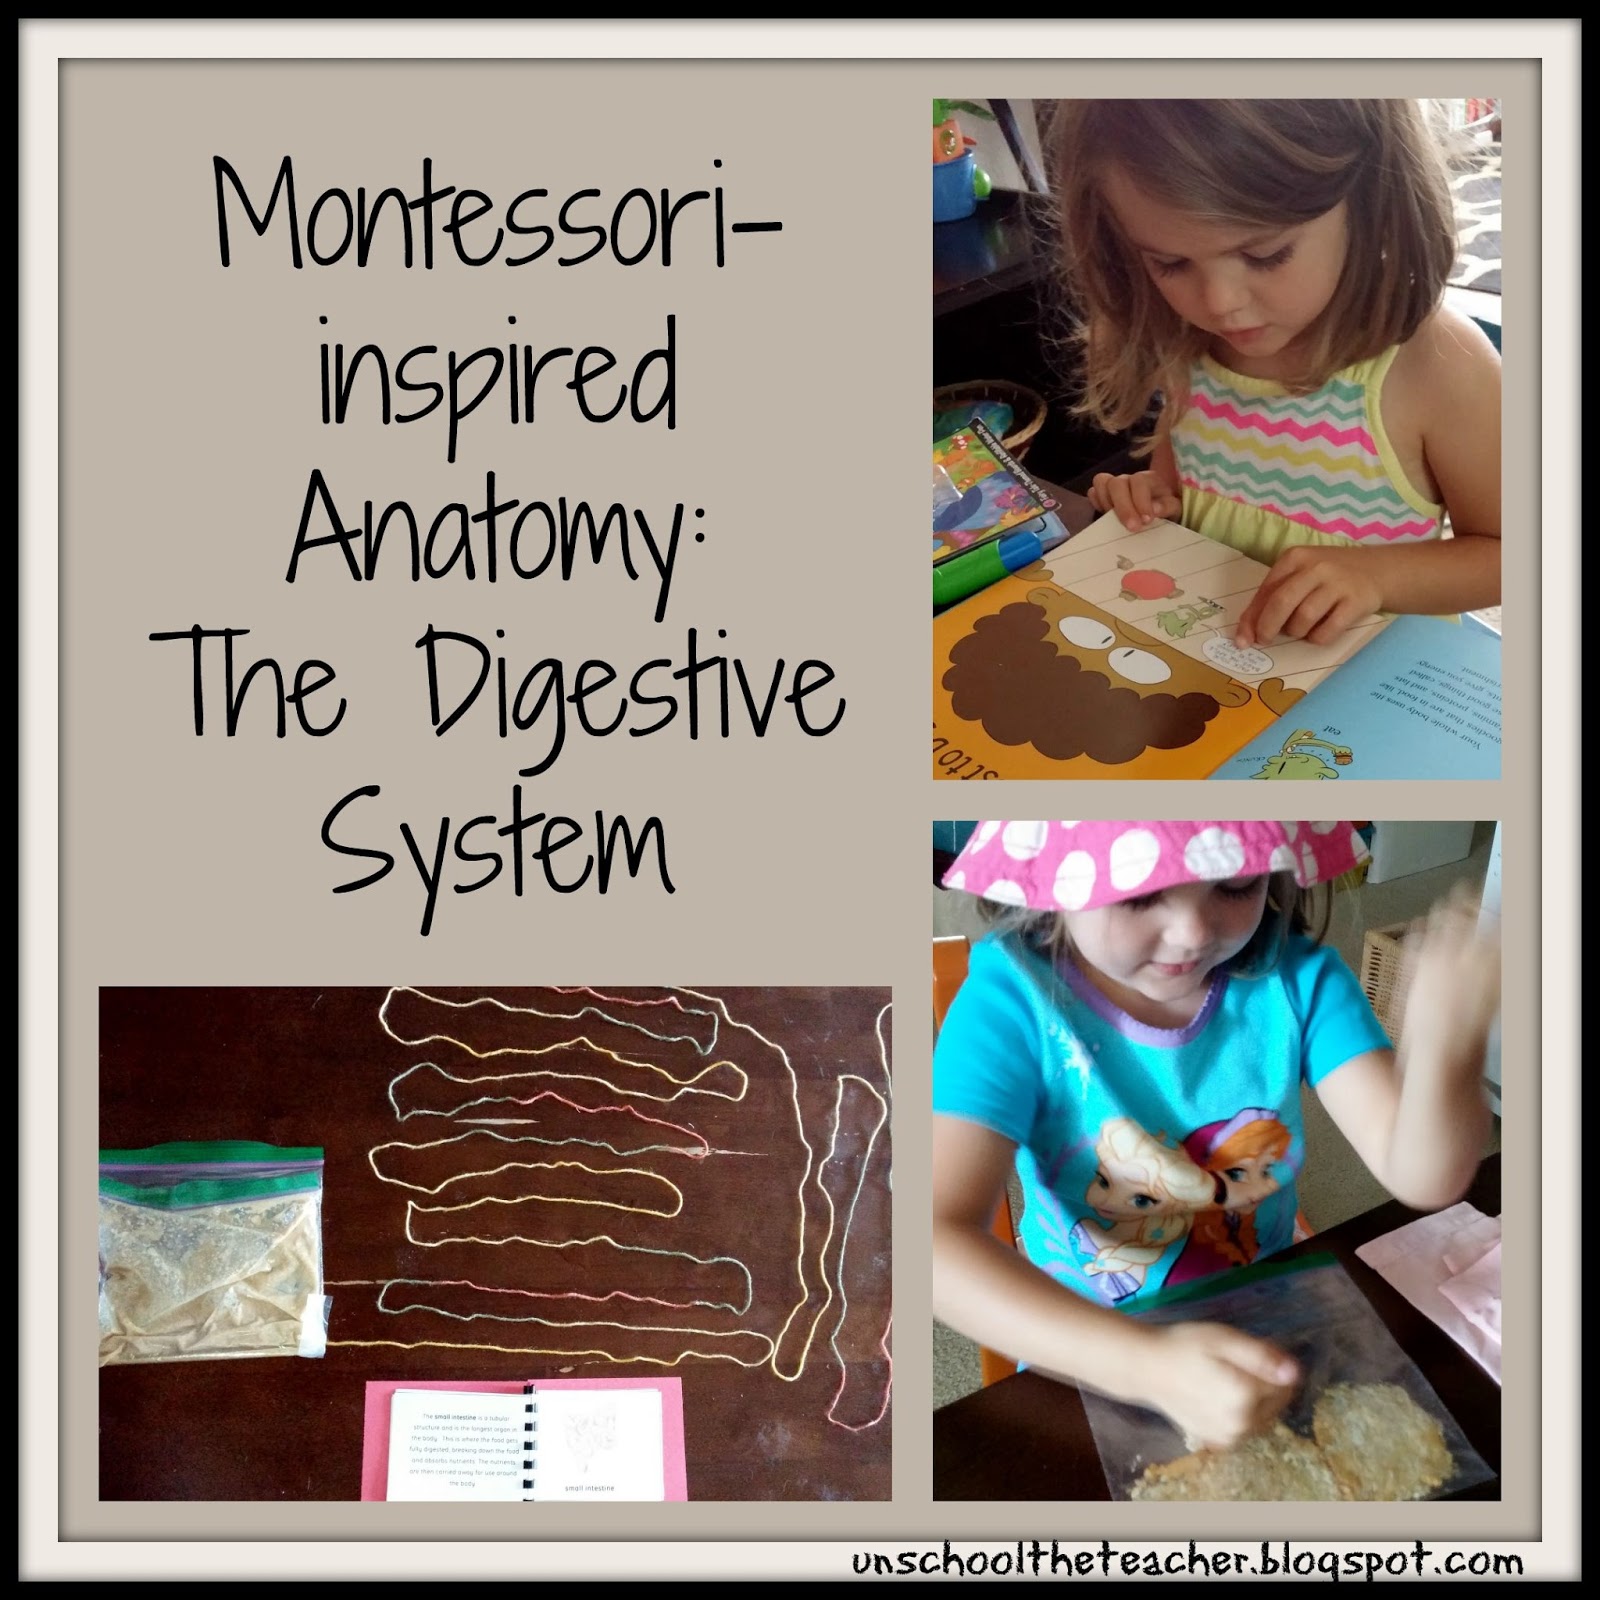 Unschool the Teacher: The Digestive System for Kids